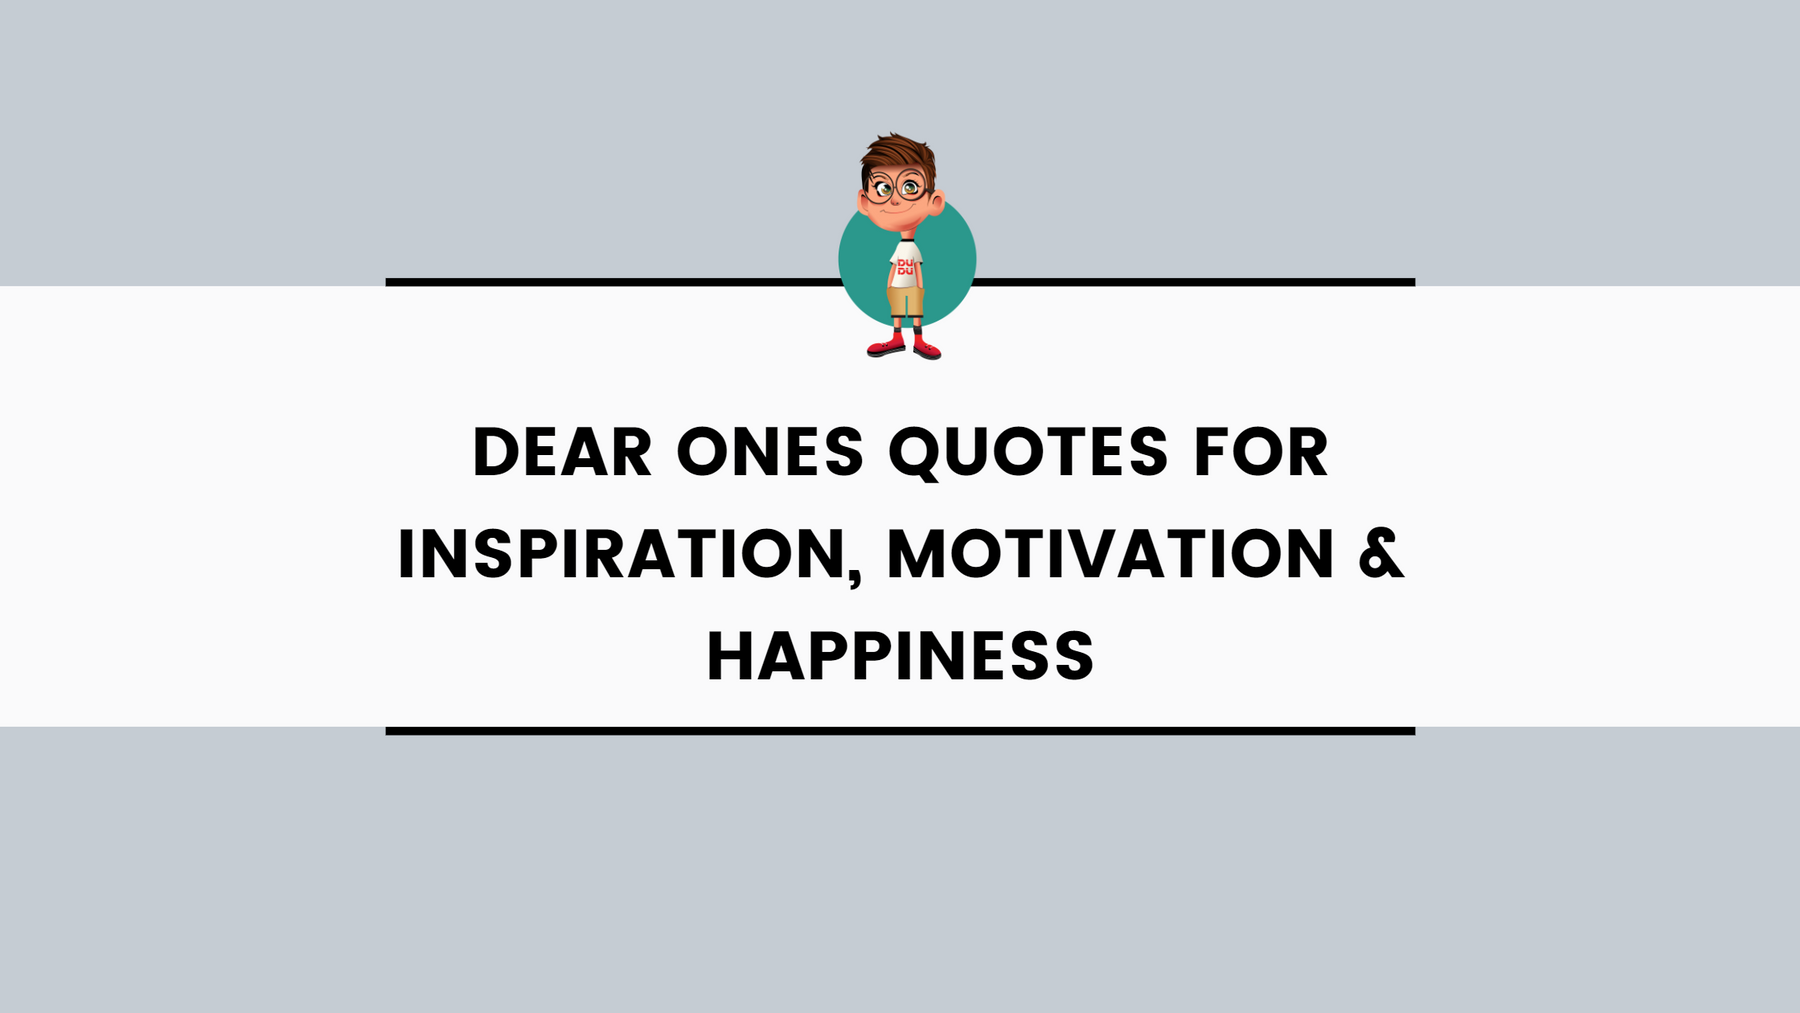 Dear Ones Quotes for Inspiration, Motivation & Happiness